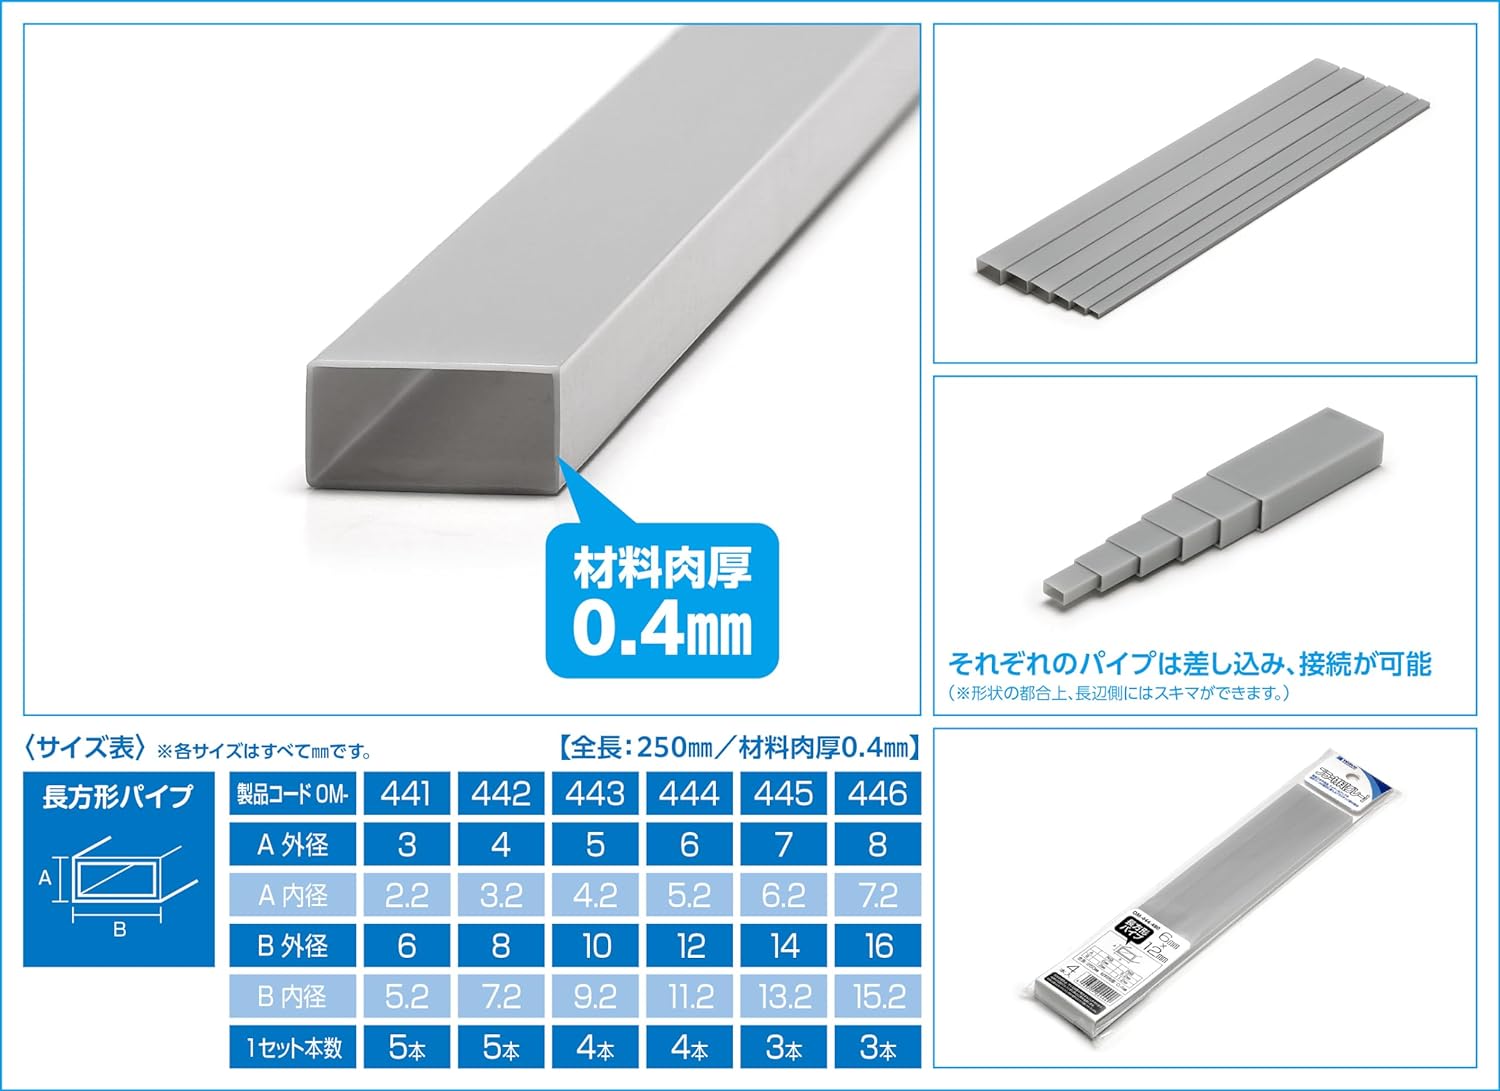 Wave OM-444 Plastic Material, Gray, Rectangular Pipe, 0.2 x 0.5 inches (6 x 12 mm), 4 Pieces - BanzaiHobby